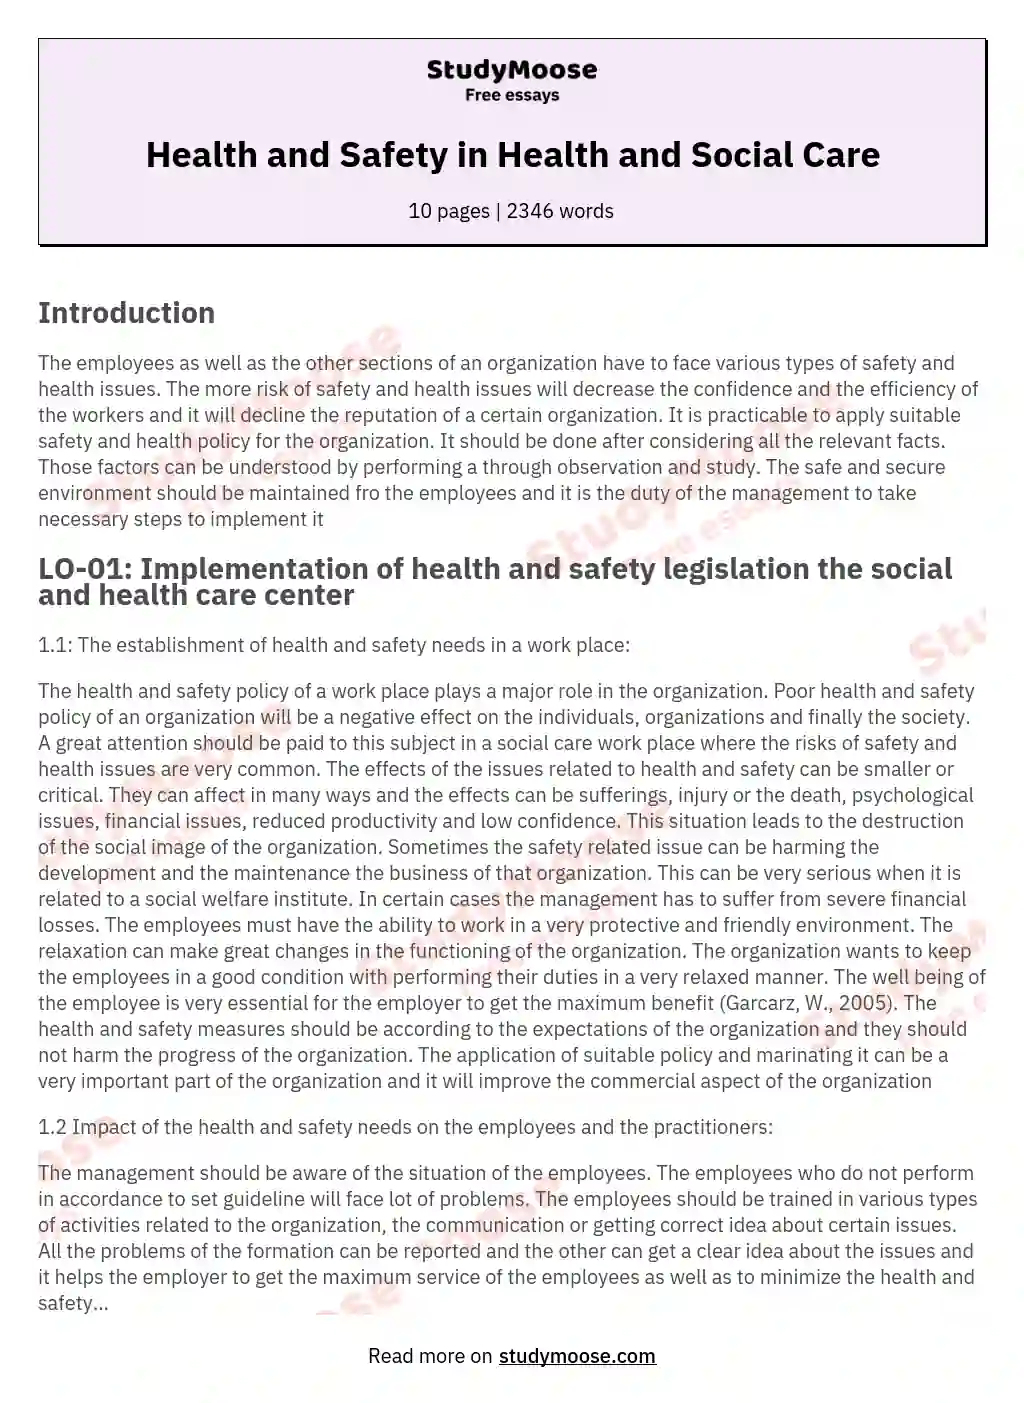 Health and Safety in Health and Social Care essay